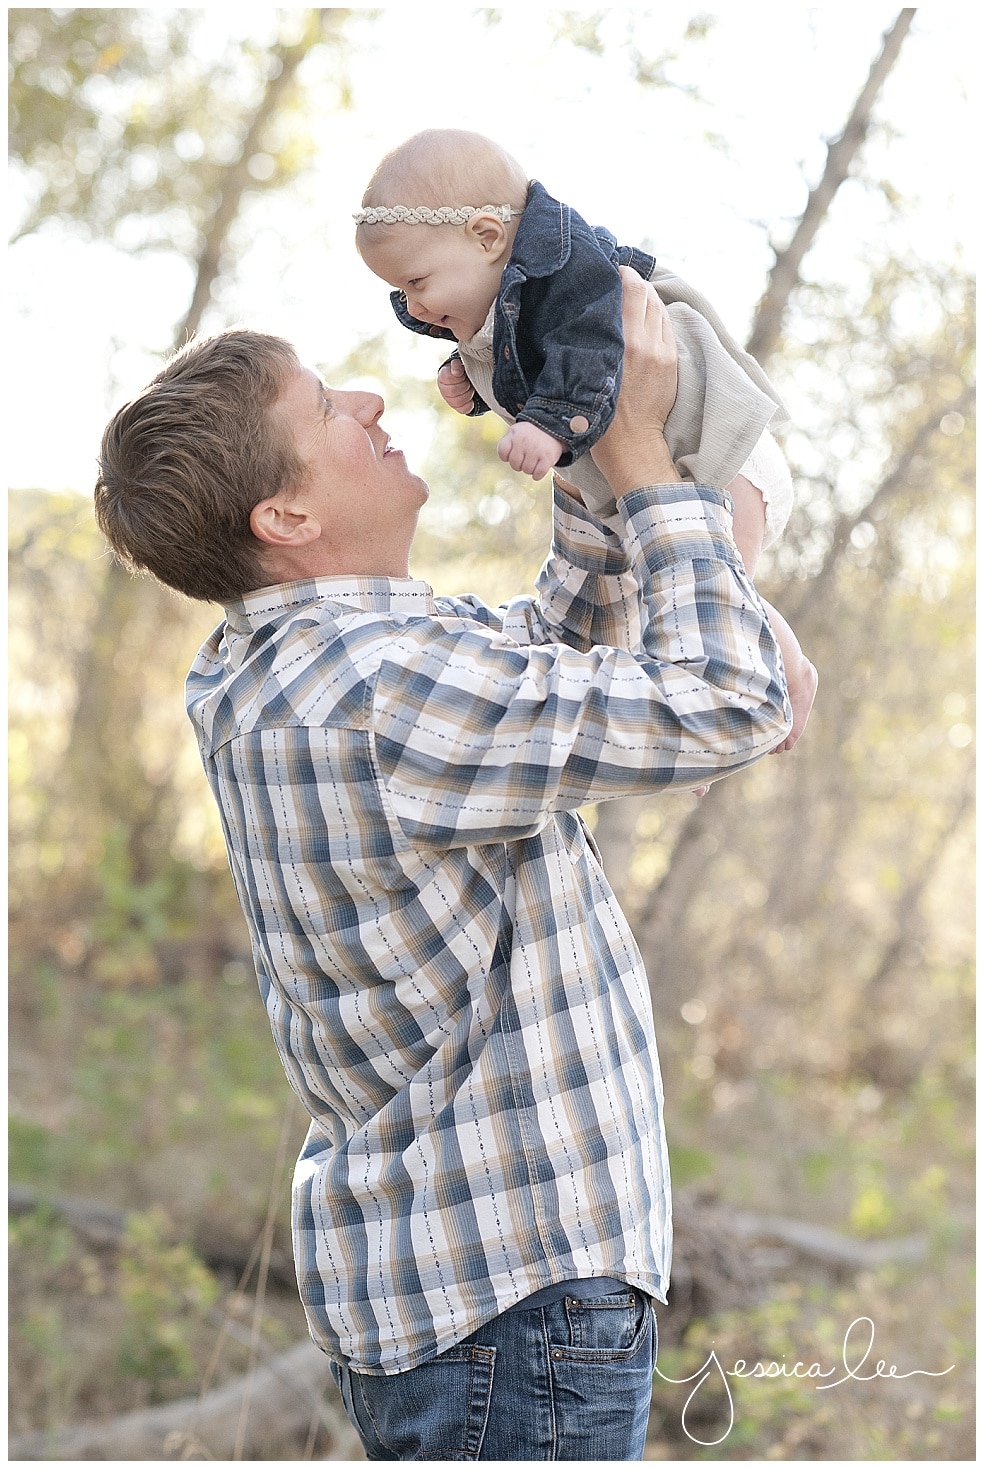 Photography Broomfield, Jessica Lee Photography, baby in dad's arms